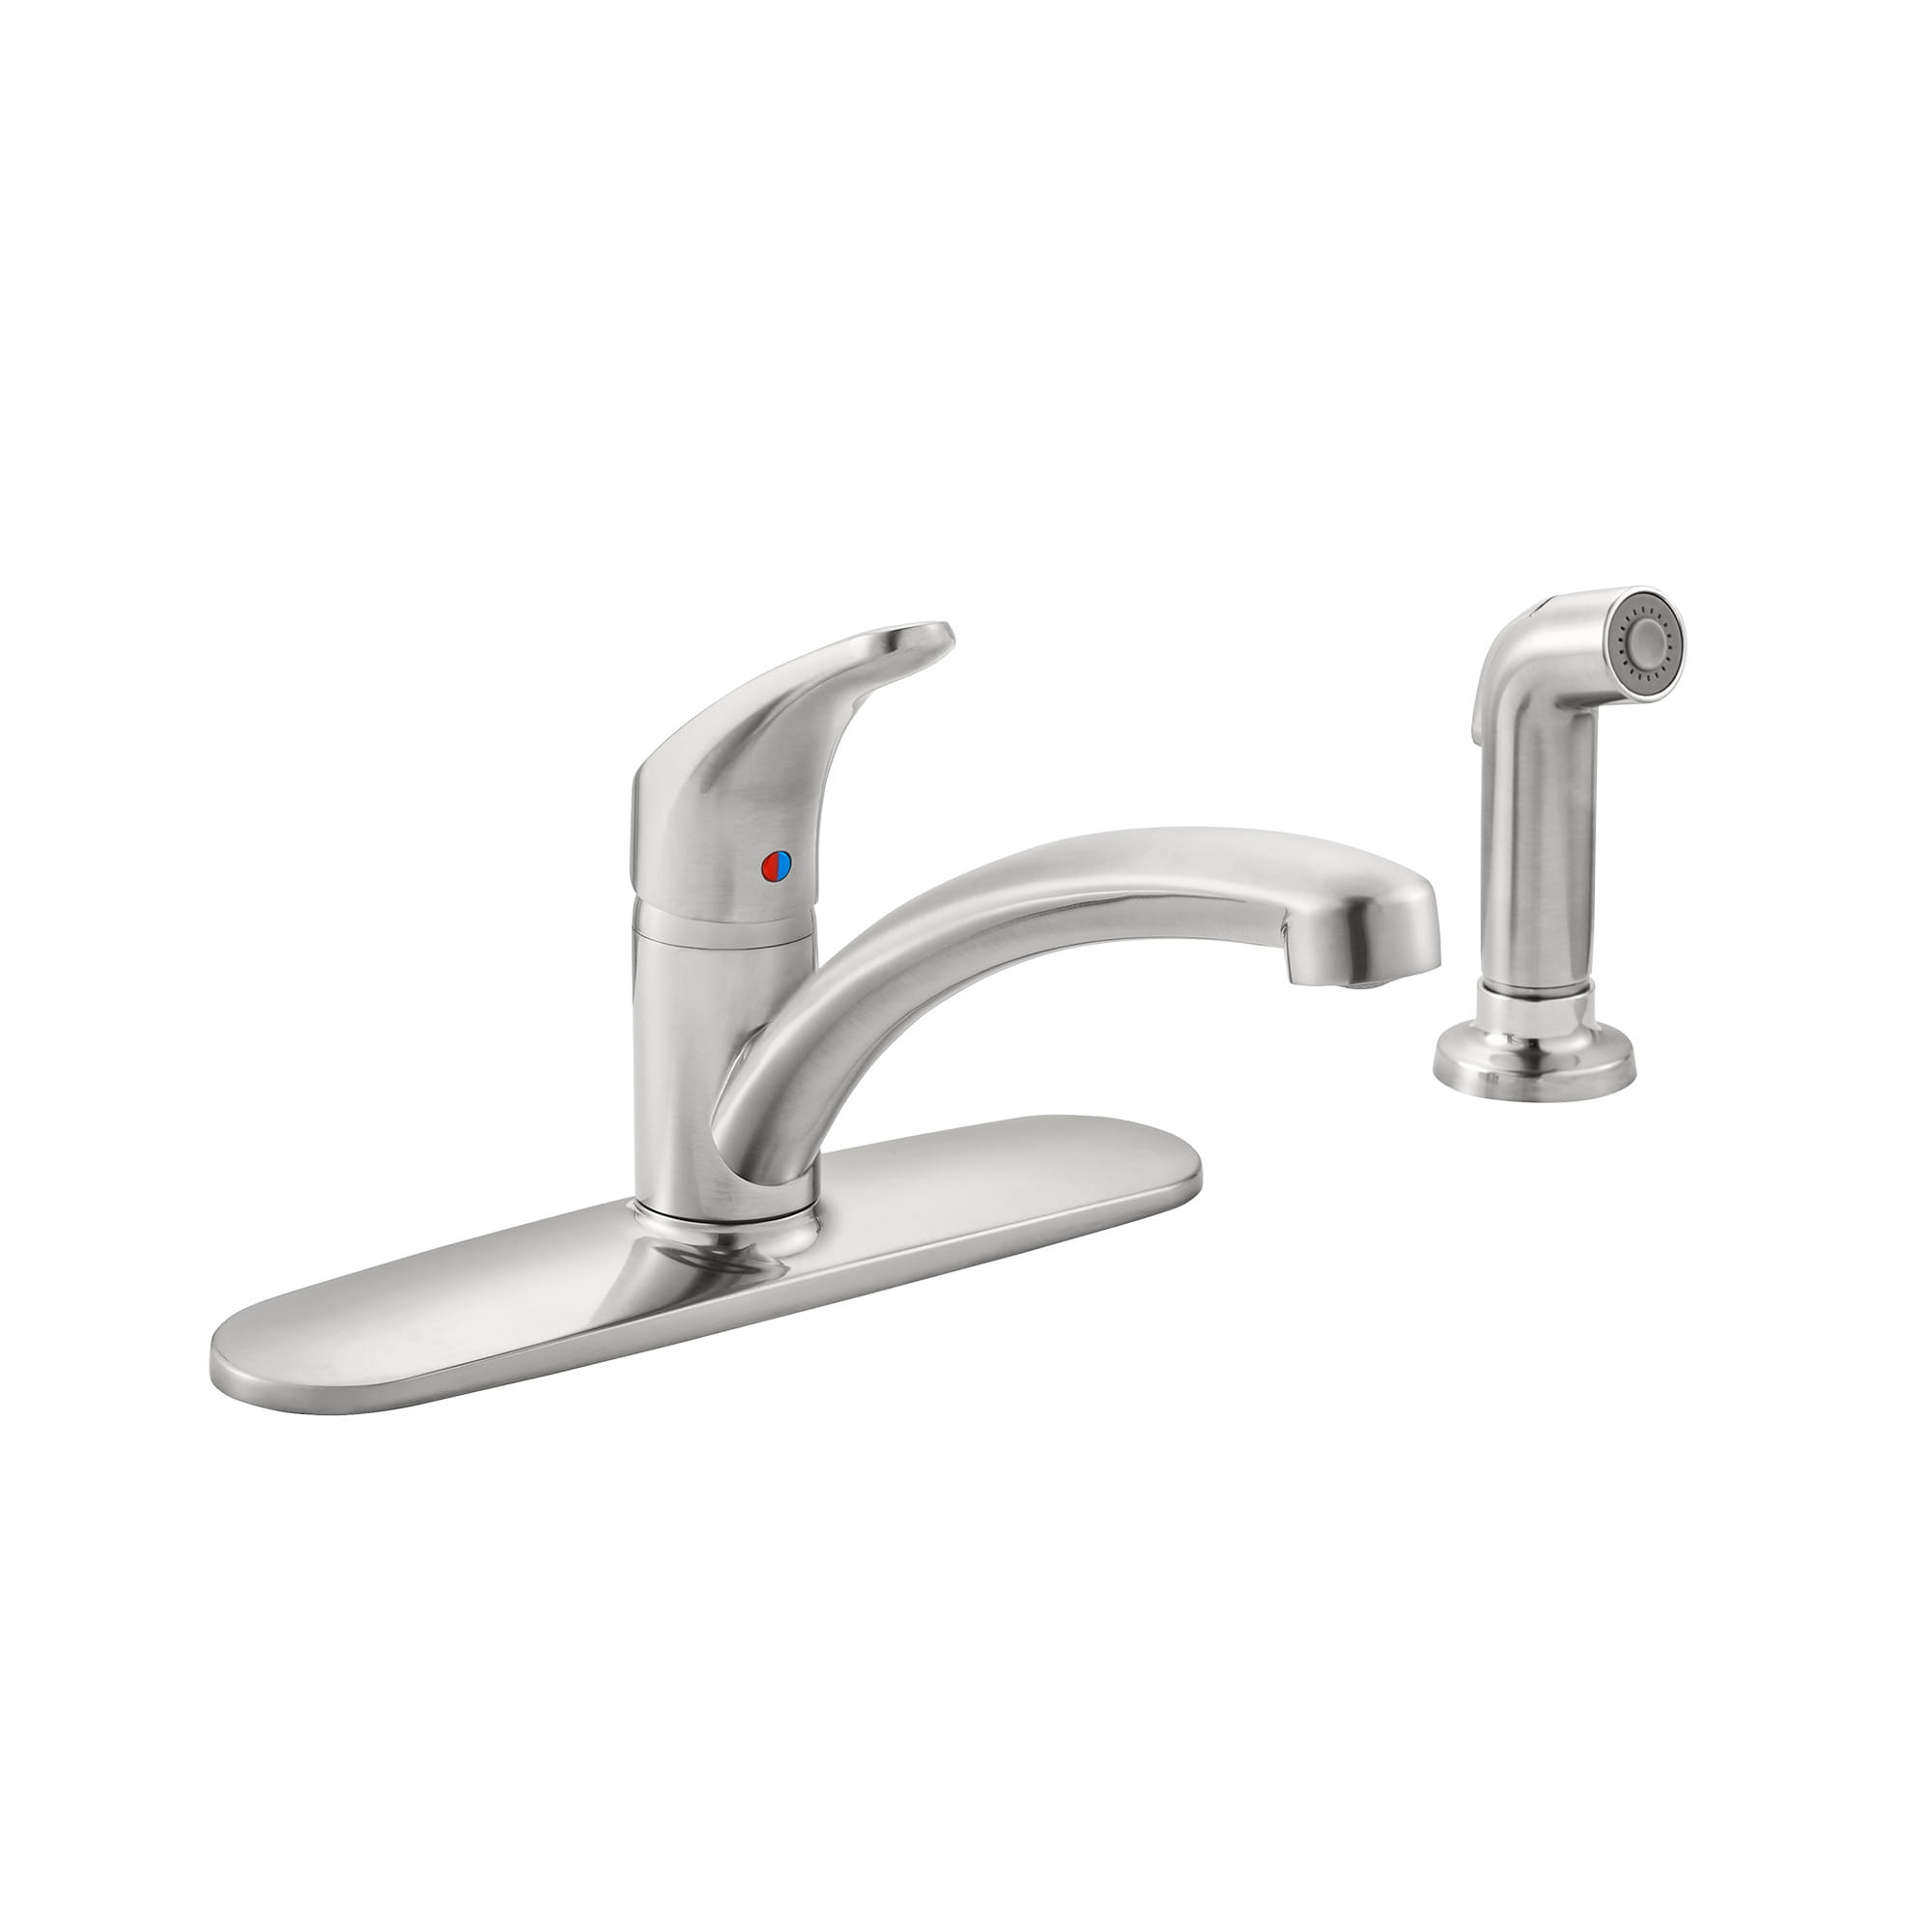 Colony® PRO Single-Handle Kitchen Faucet 1.5 gpm/5.7 L/min With Side Spray